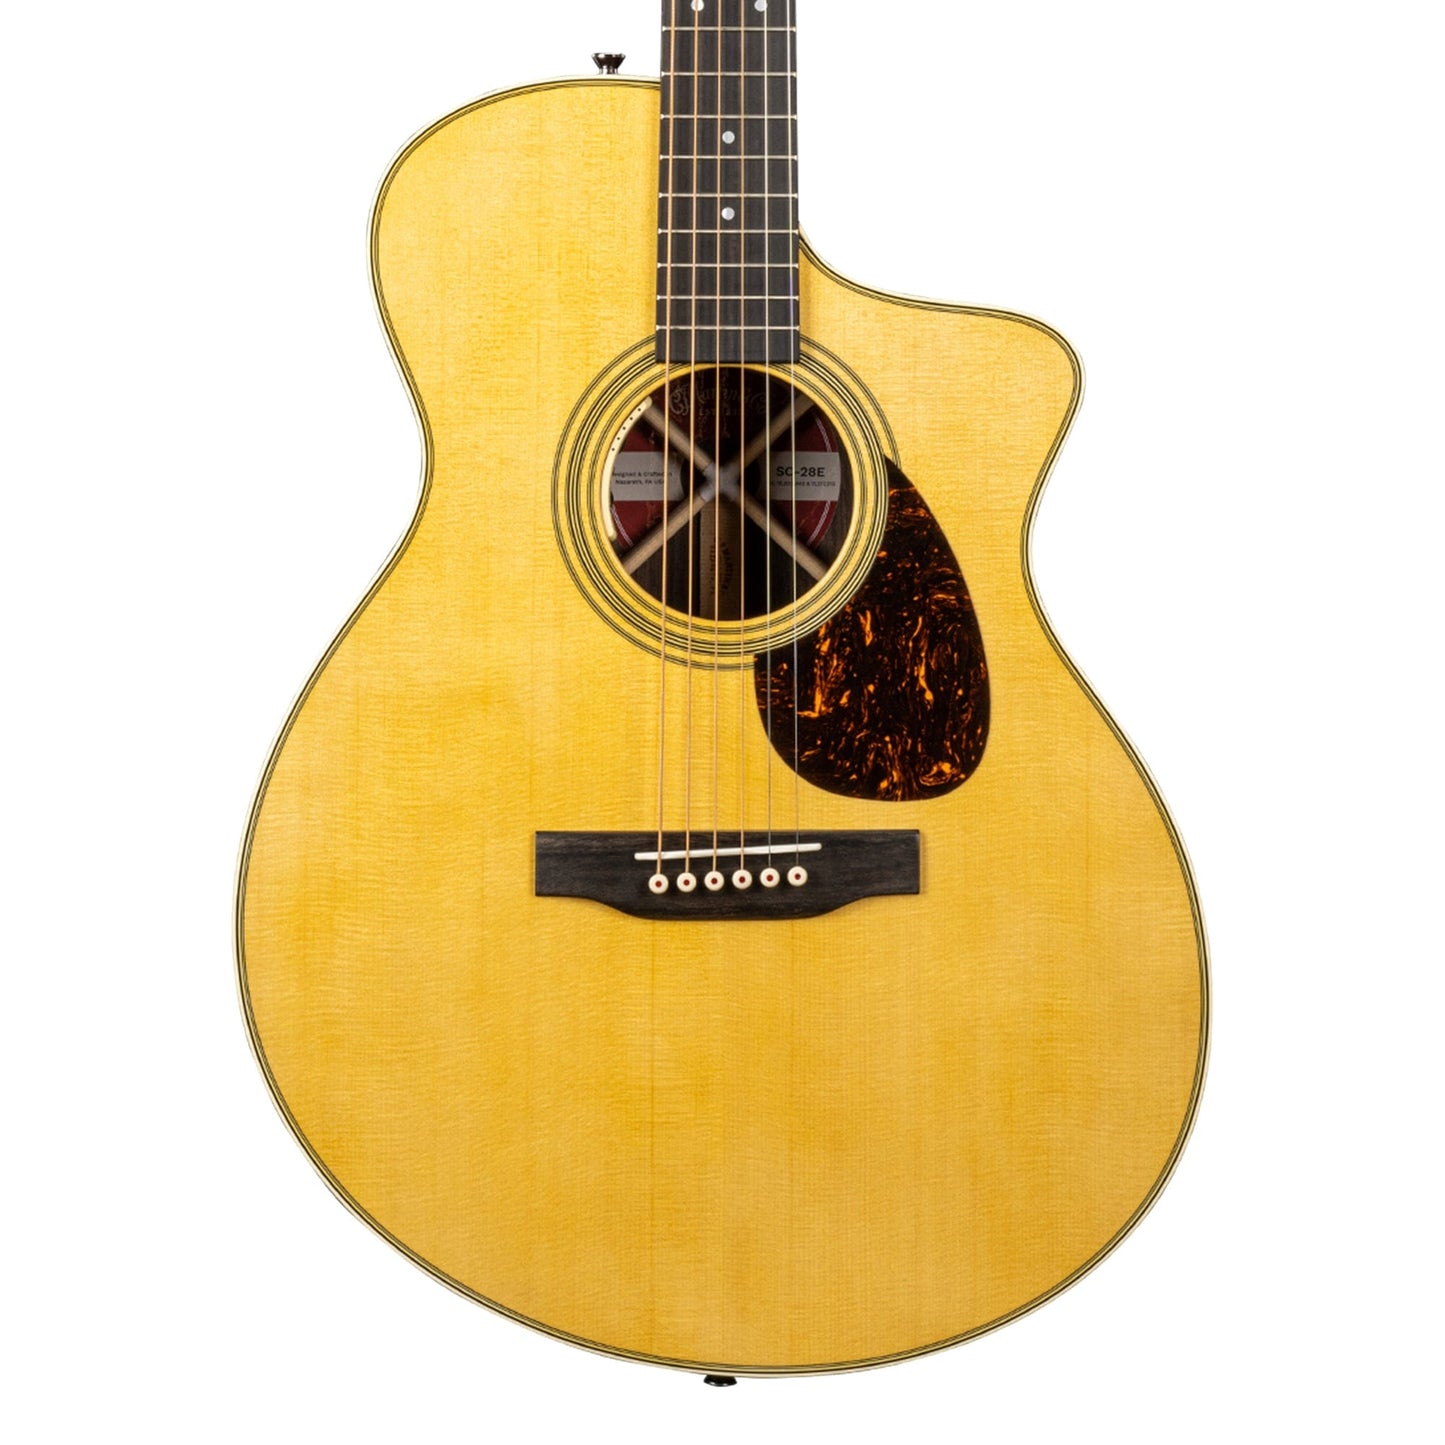 Martin Standard Series SC-28E Spruce/East Indian Rosewood Natural Acoustic Guitars / Concert